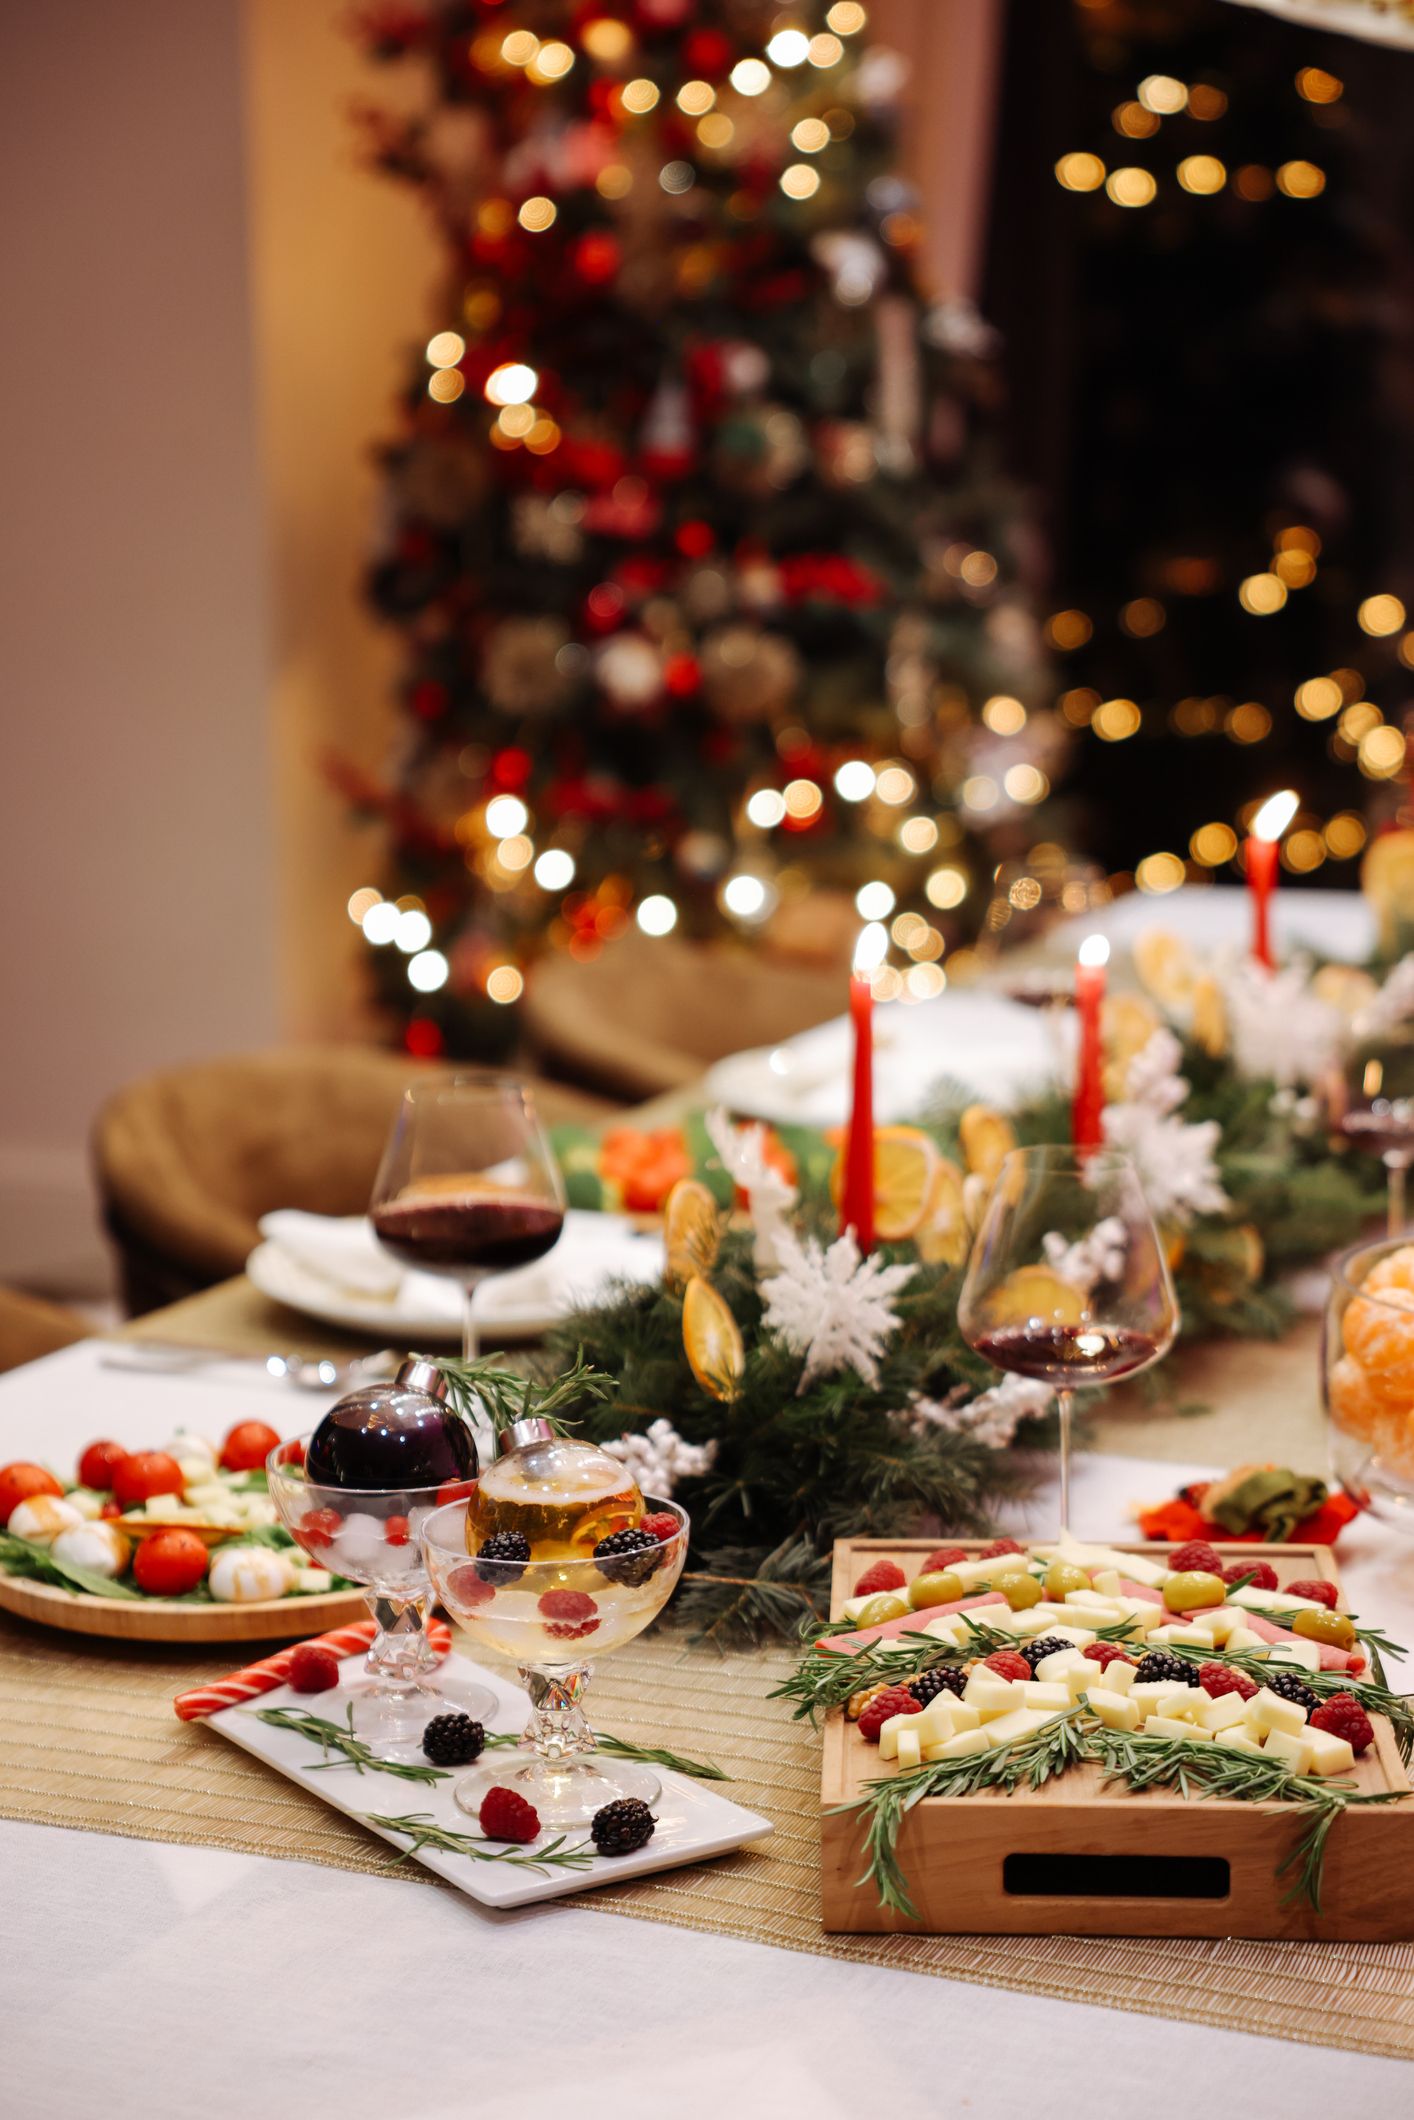 How to host the ultimate holiday party: Tips from an event-planning pro